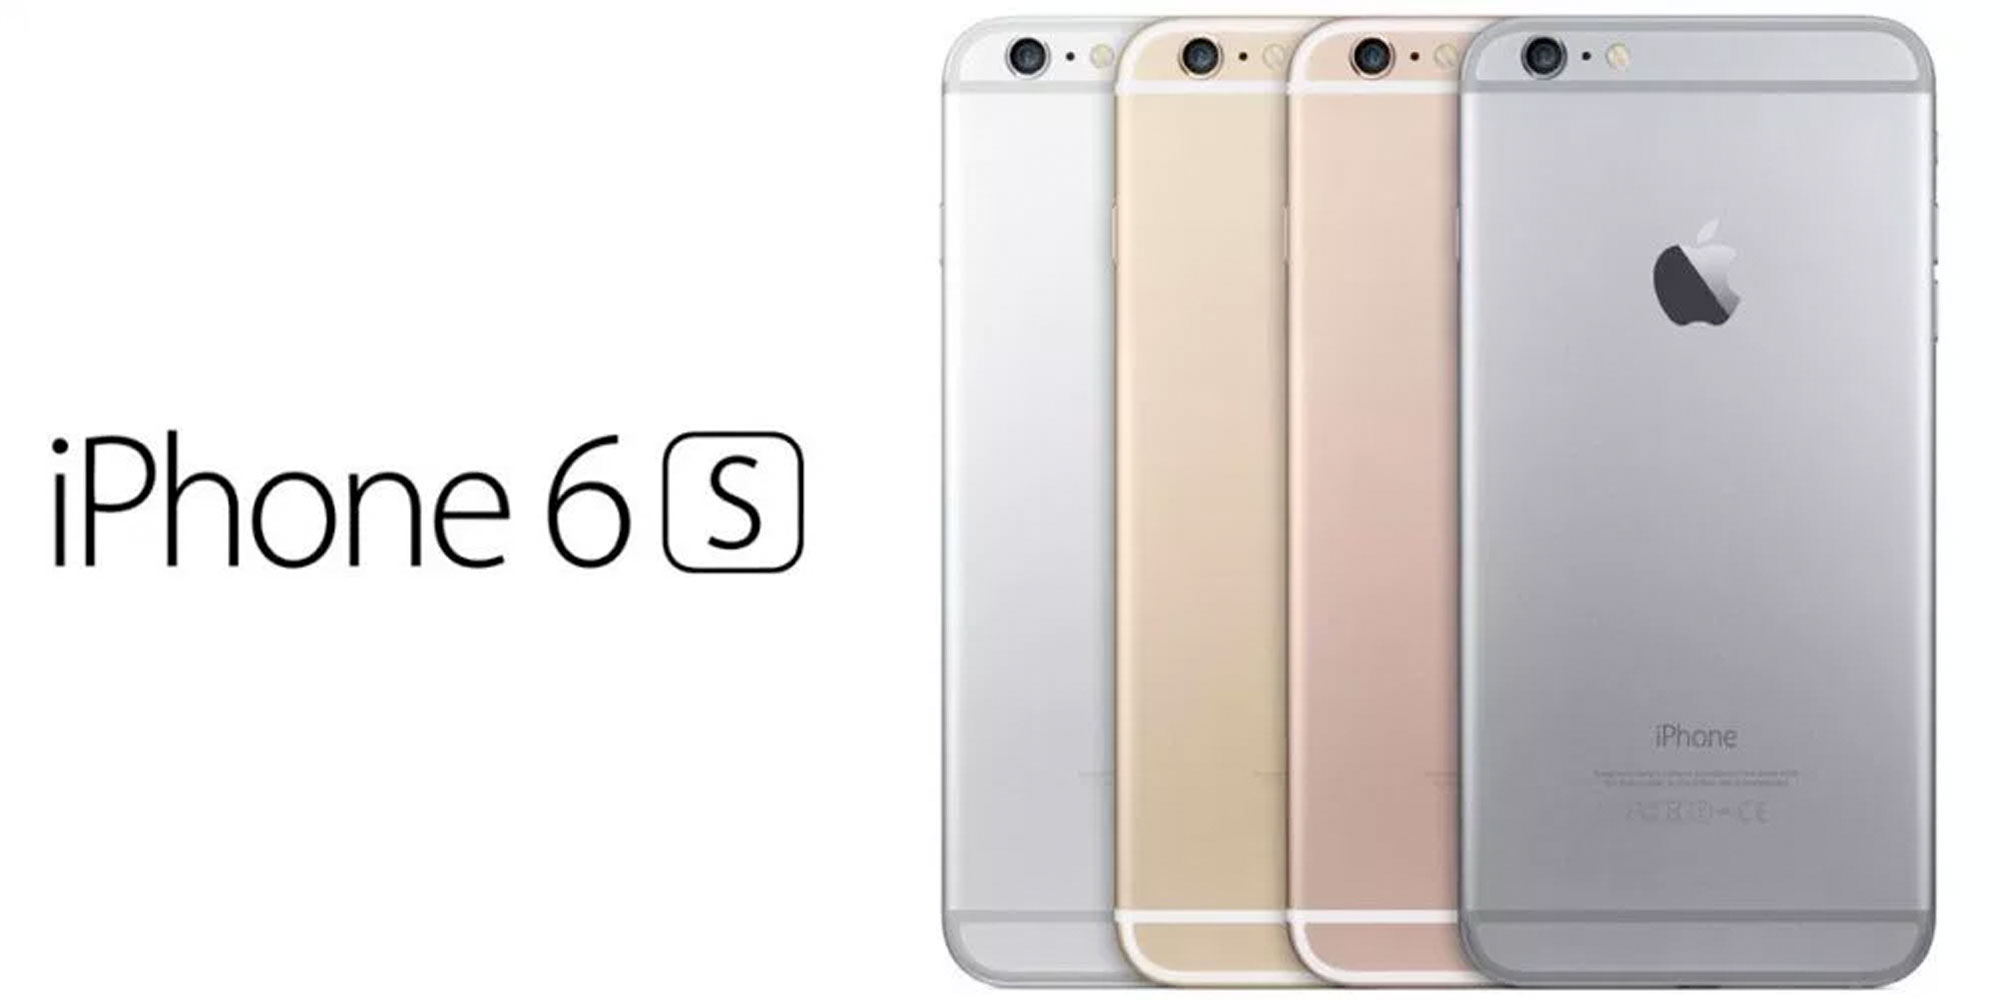 Today only, pick up an unlocked iPhone 6s from $120 Prime shipped - 9to5Toys